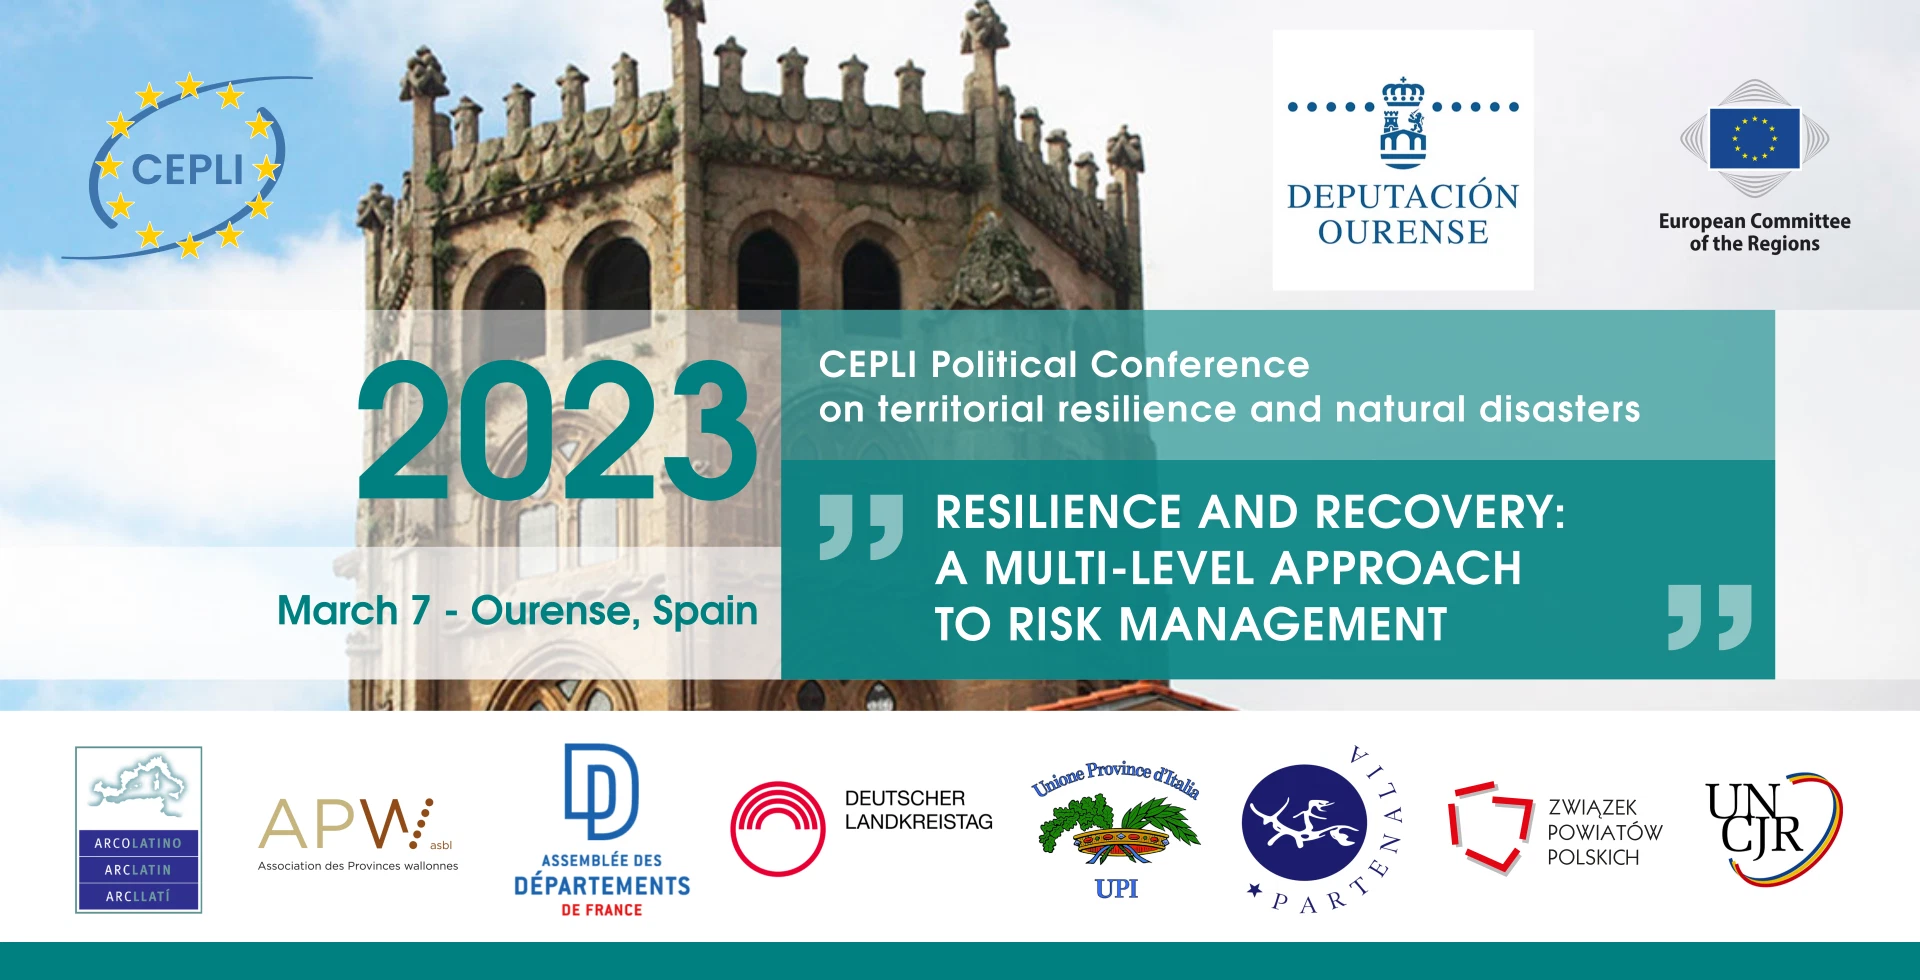 Join us on March 7 in Ourense, Spain, at the 2023 CEPLI Political Conference on territorial resilience and natural disasters!